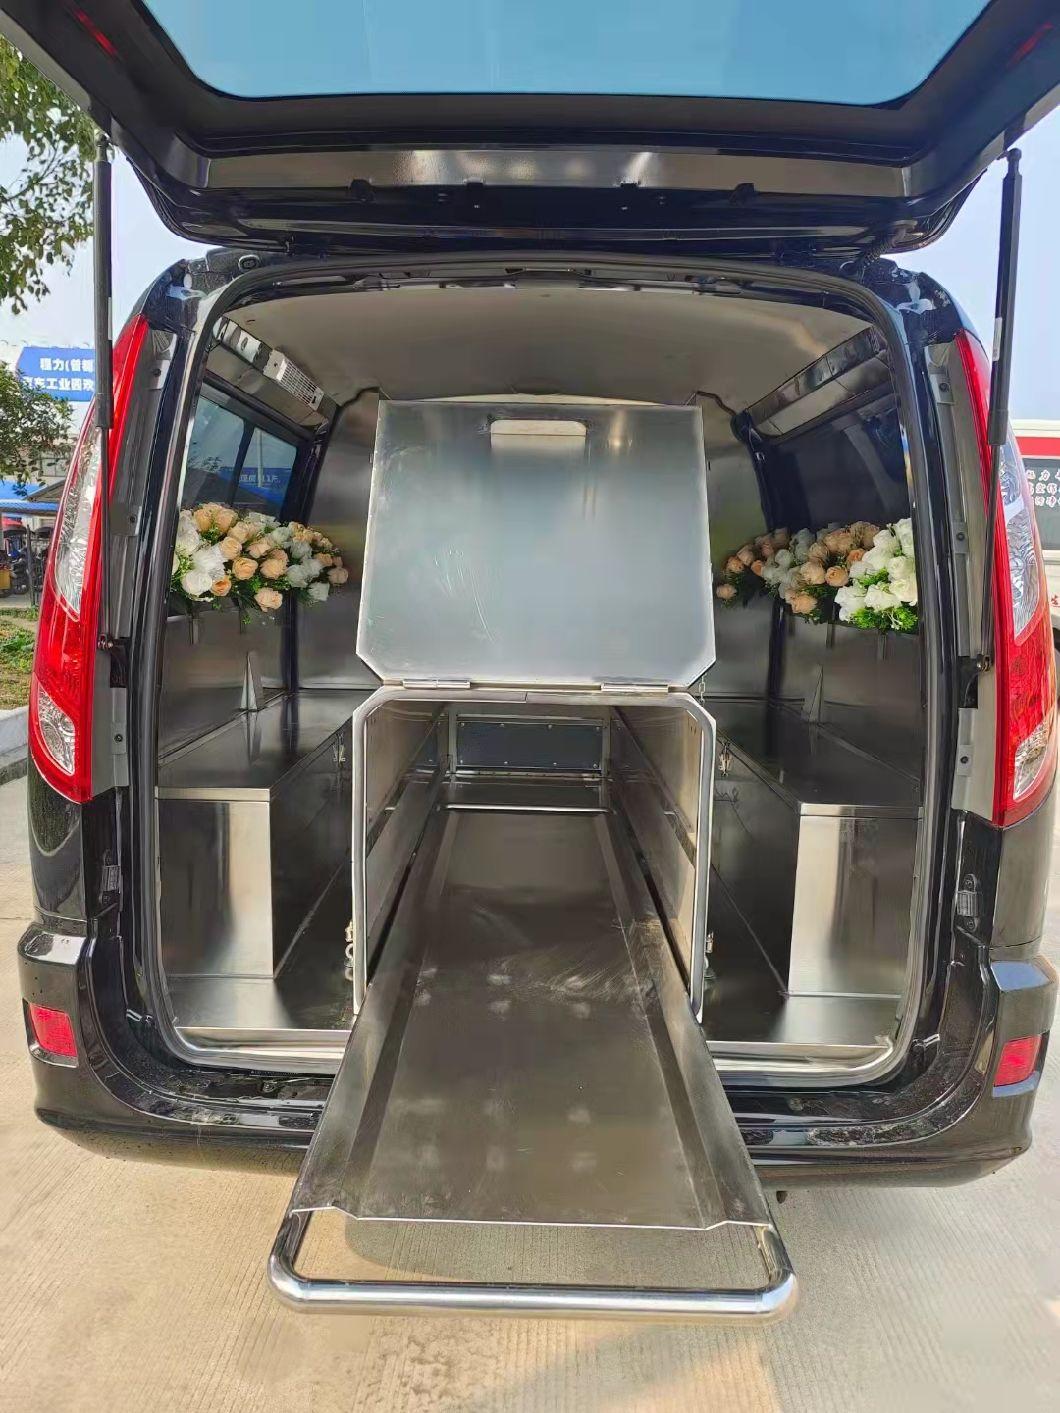 Ive-Co Diesel Automatic Funeral Carriage / Hearse 130HP